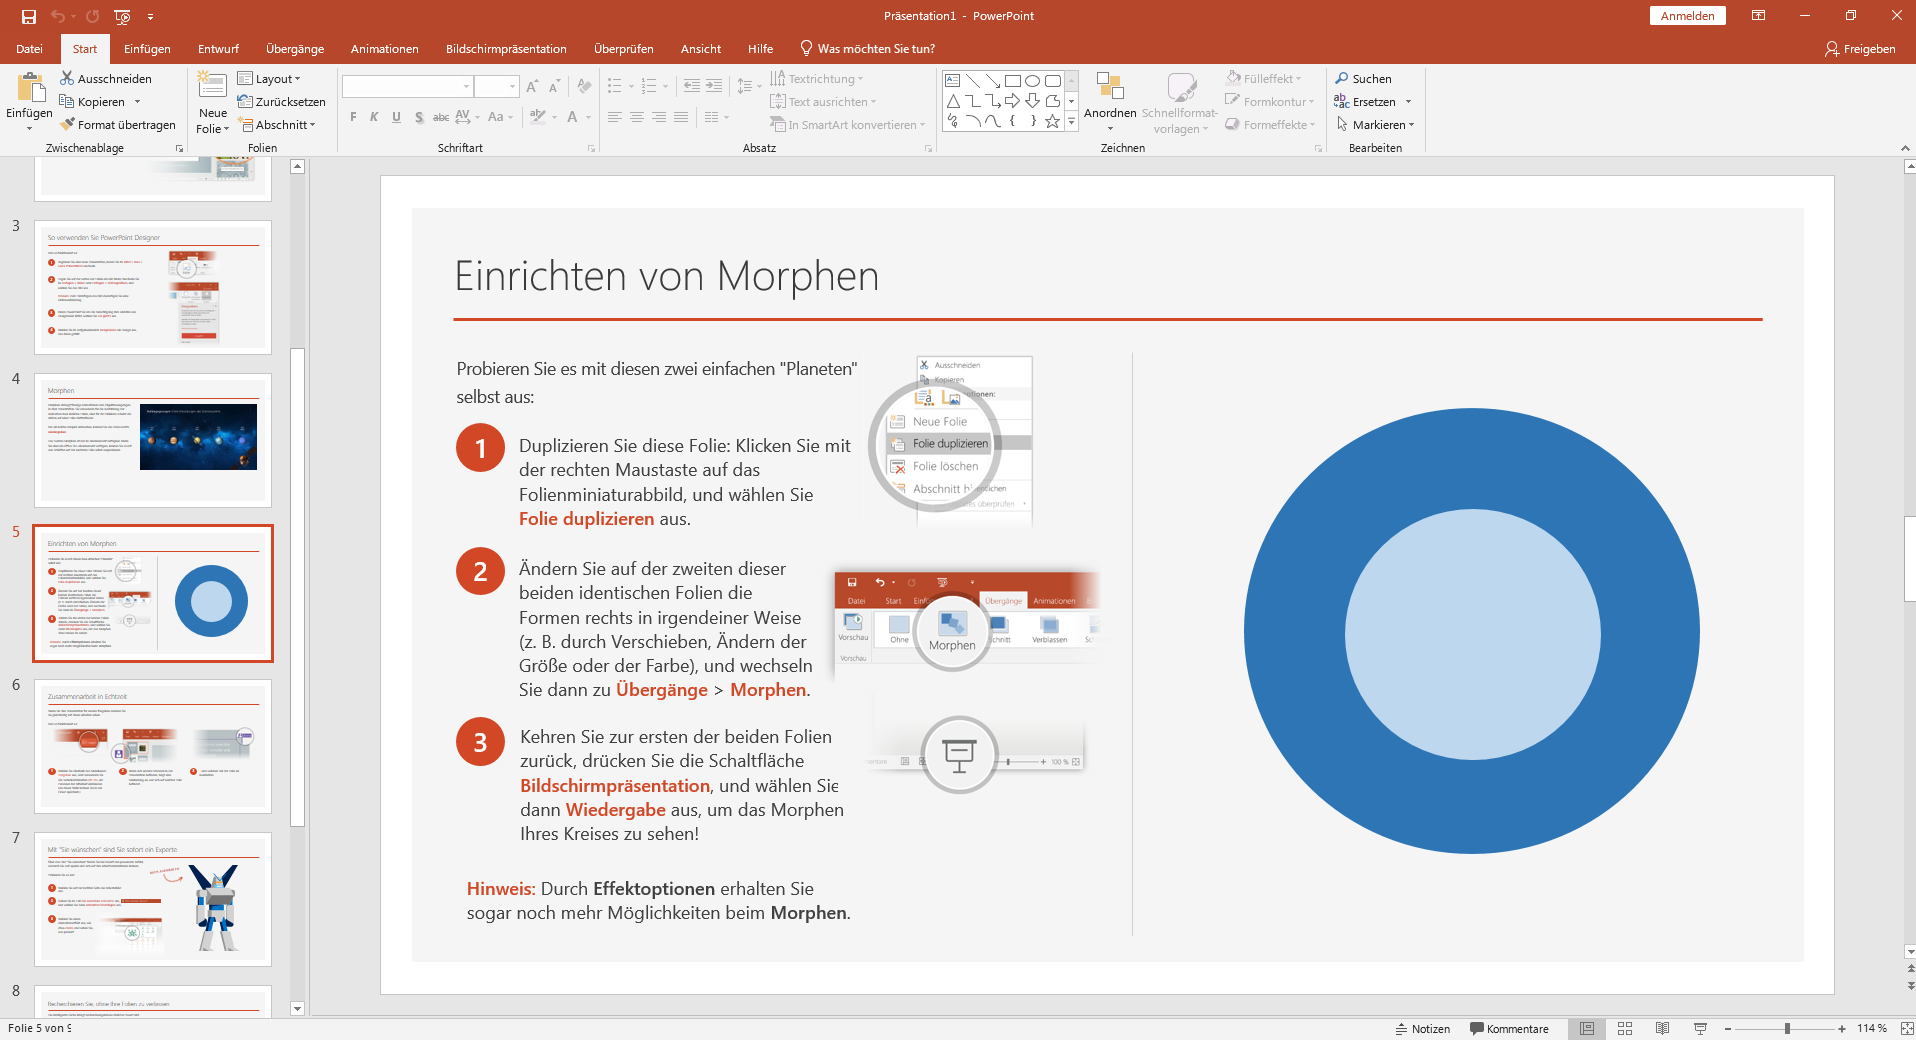 microsoft powerpoint 2019 download